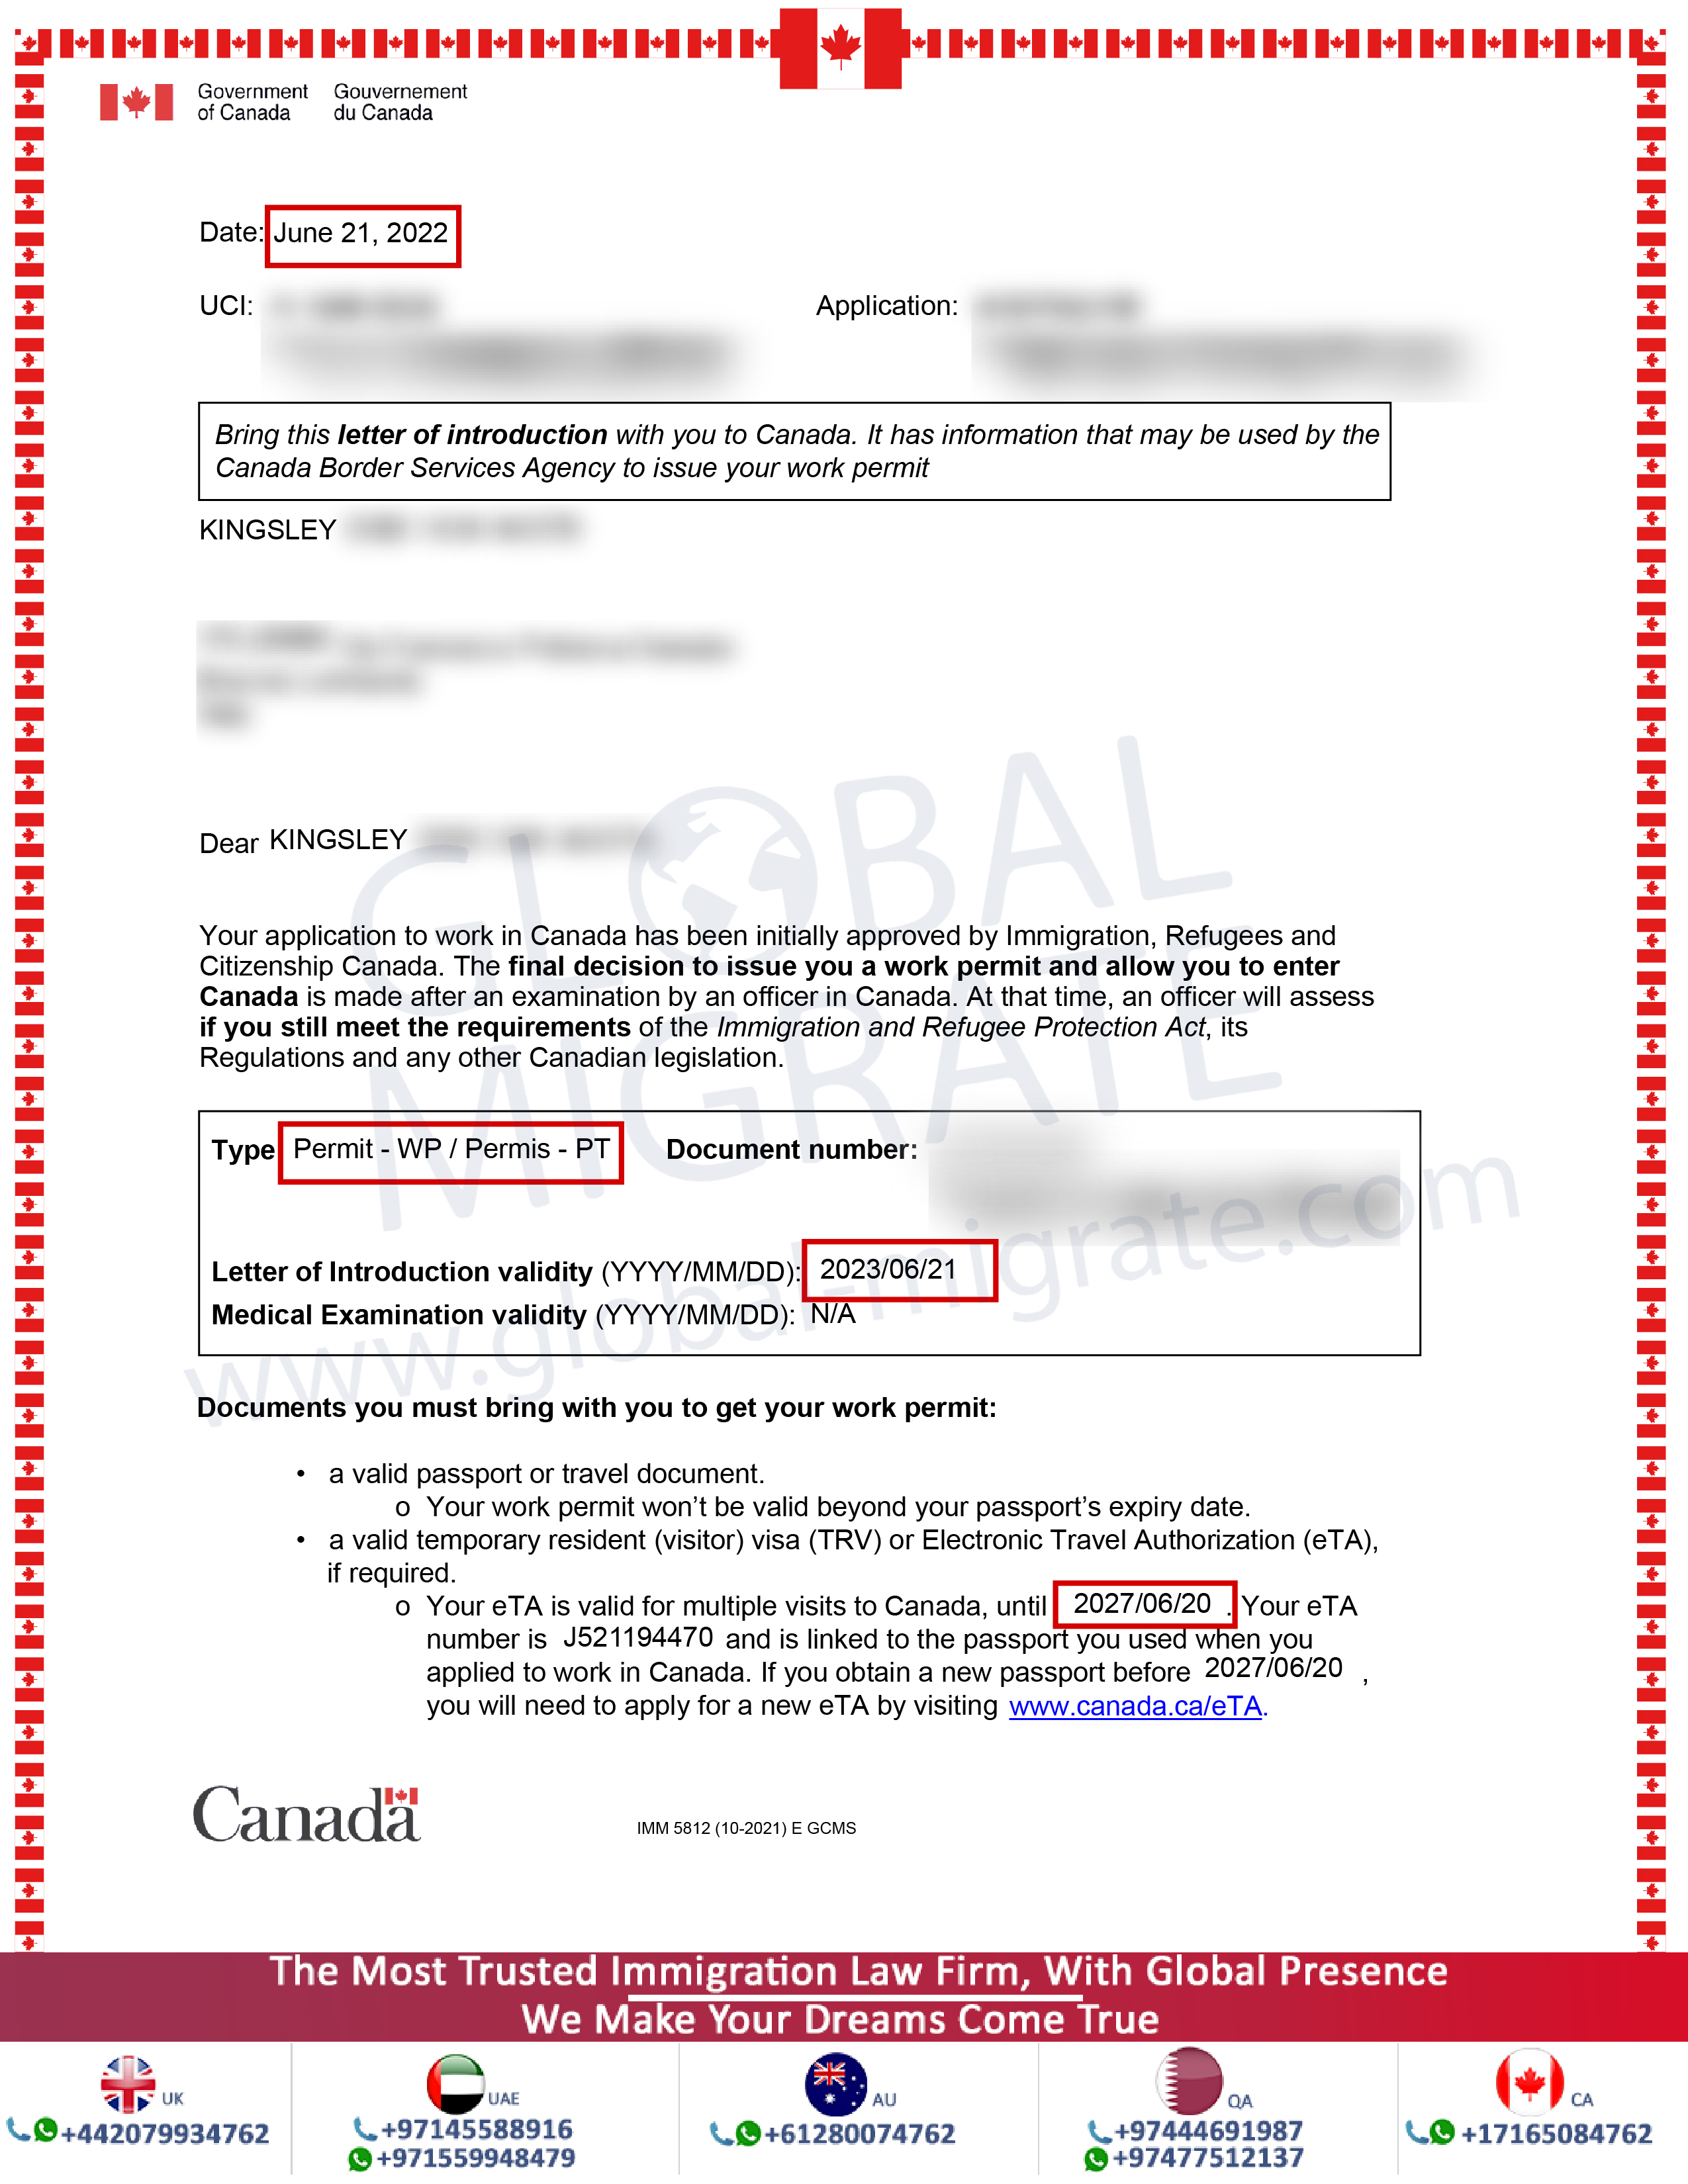 canada-workpermit-approval-global-migrate